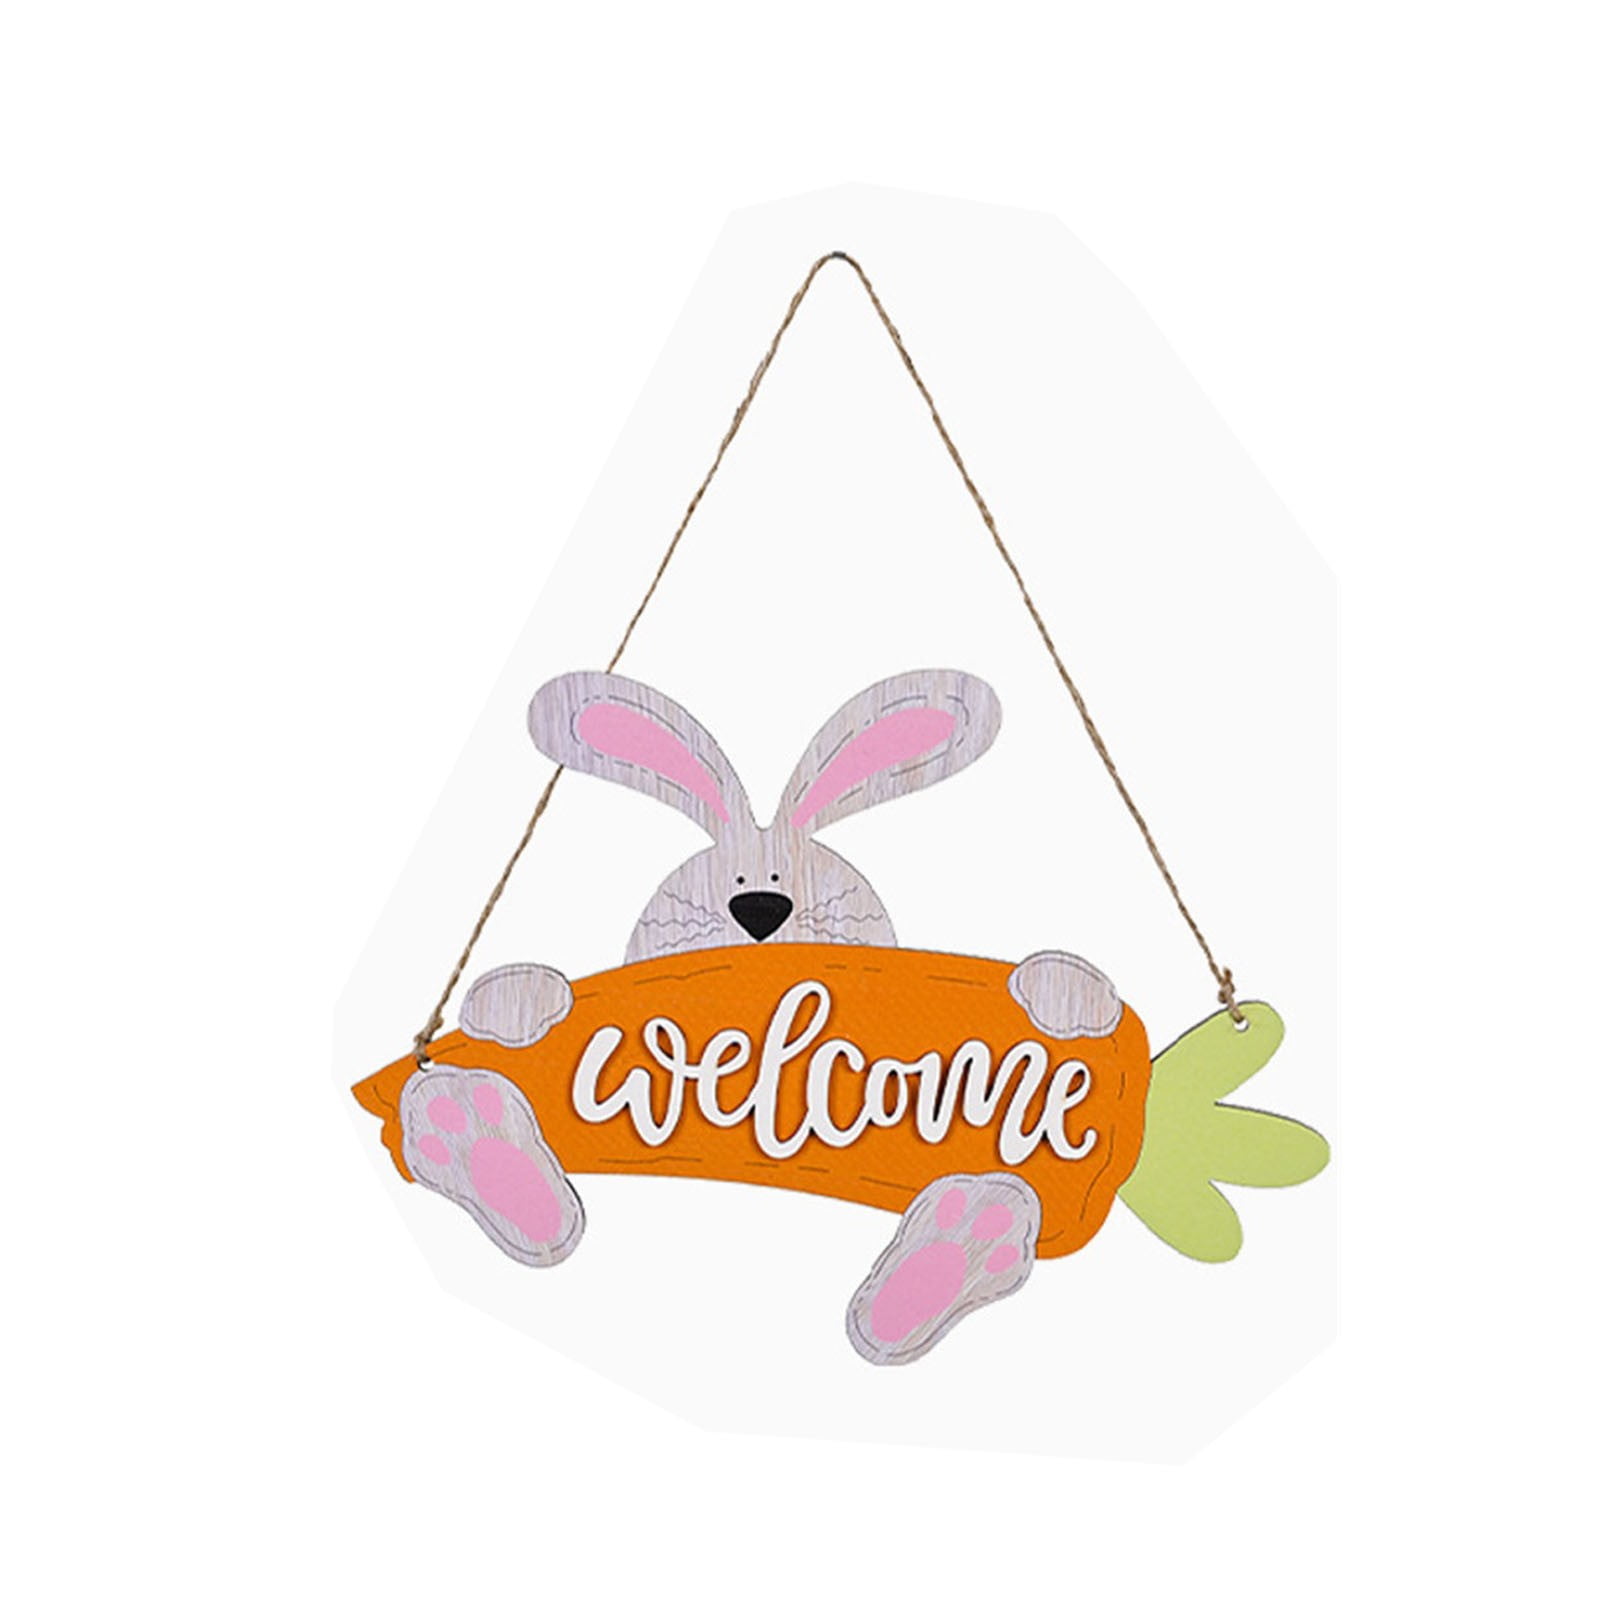 Details about   Easter Hanging Tags Ornament Bunny Plaque w/ Rope Party Door Home Decoration 